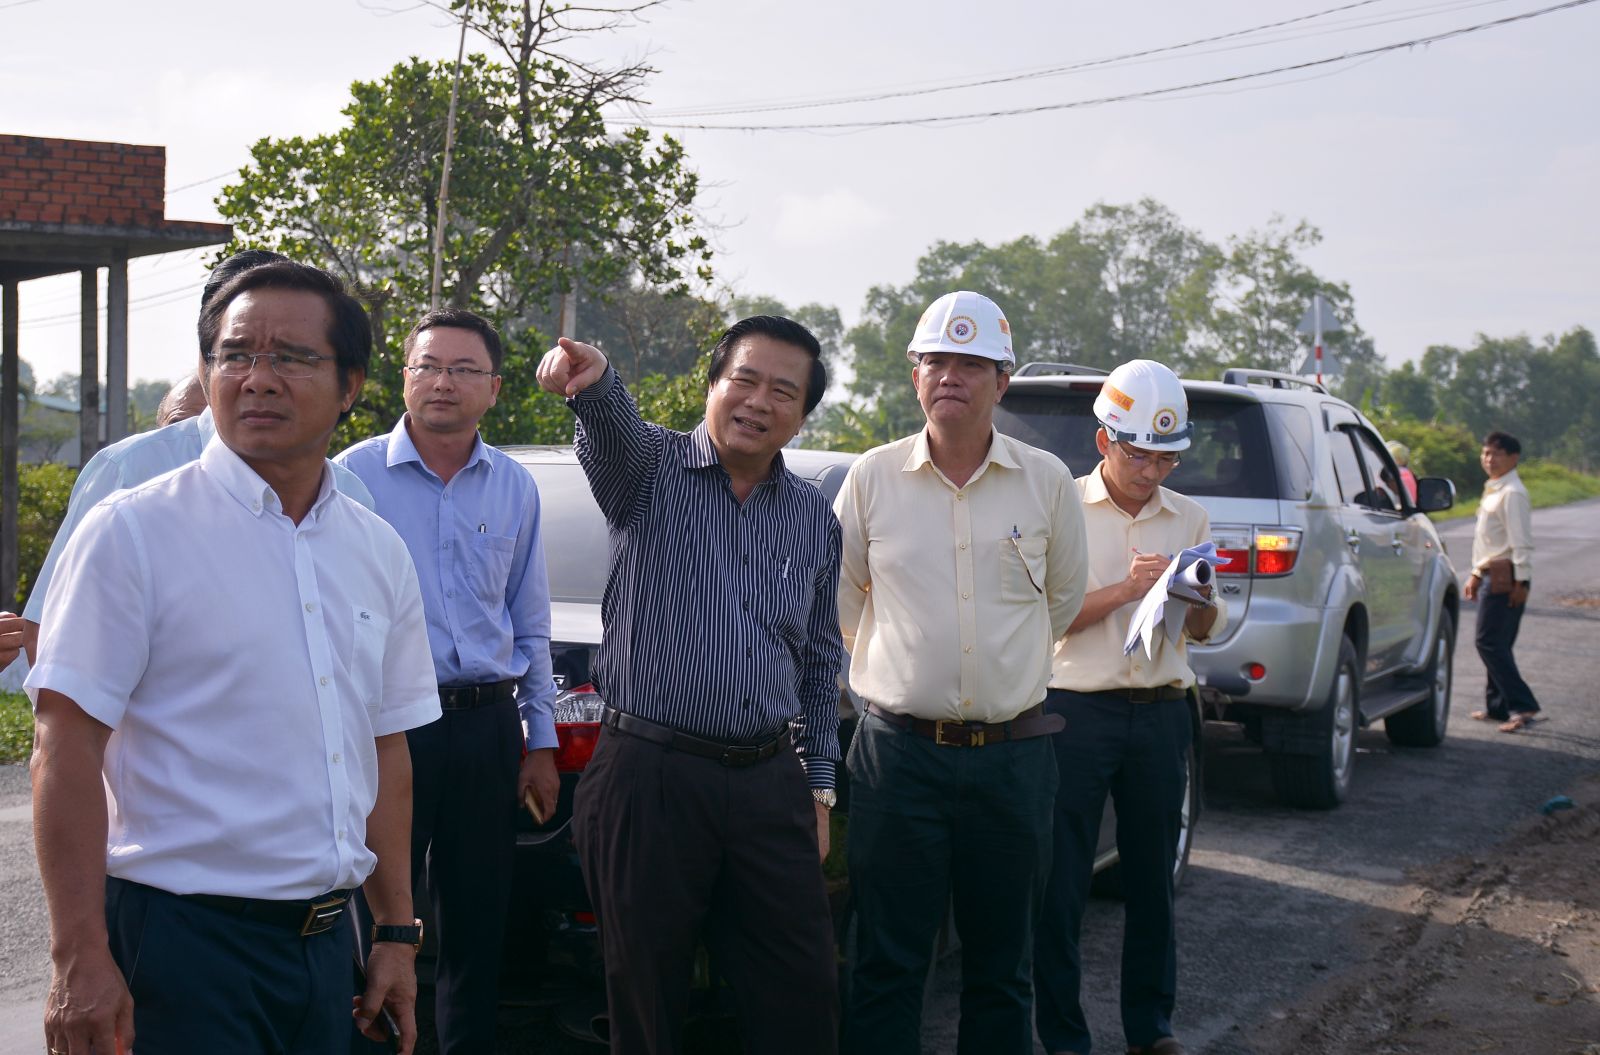 In Can Duoc district, Secretary of Provincial Party Committee, Chairman of Provincial People's Council - Pham Van Ranh asks the Project Management Unit of Transport work, Department of Transport to closely coordinate with Can Duoc district People's Committee to speed up the ground clearance and hand over the finished ground clearance to the construction unit as soon as possible